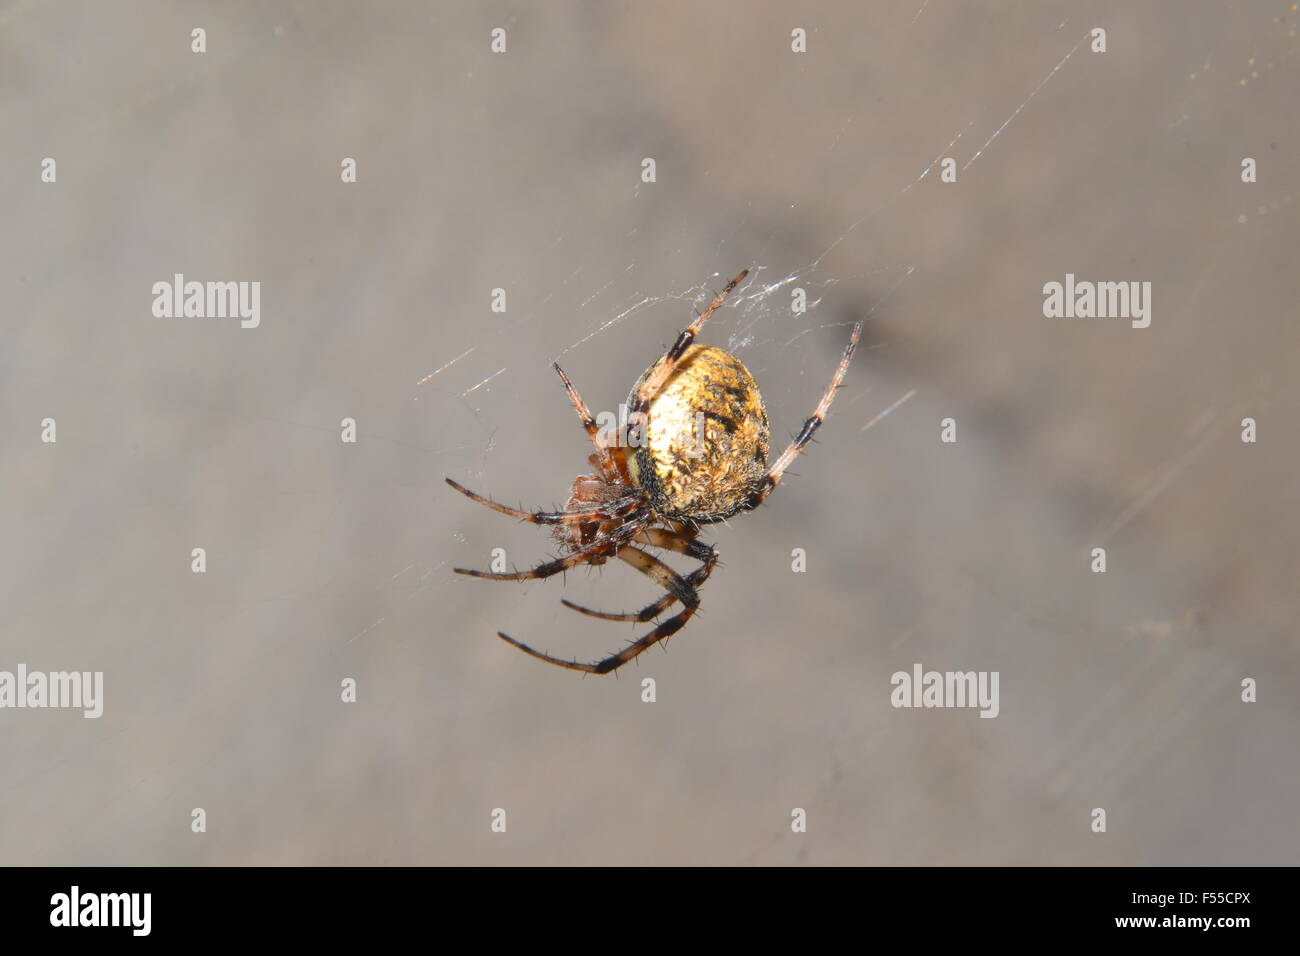 Spider in the web Stock Photo